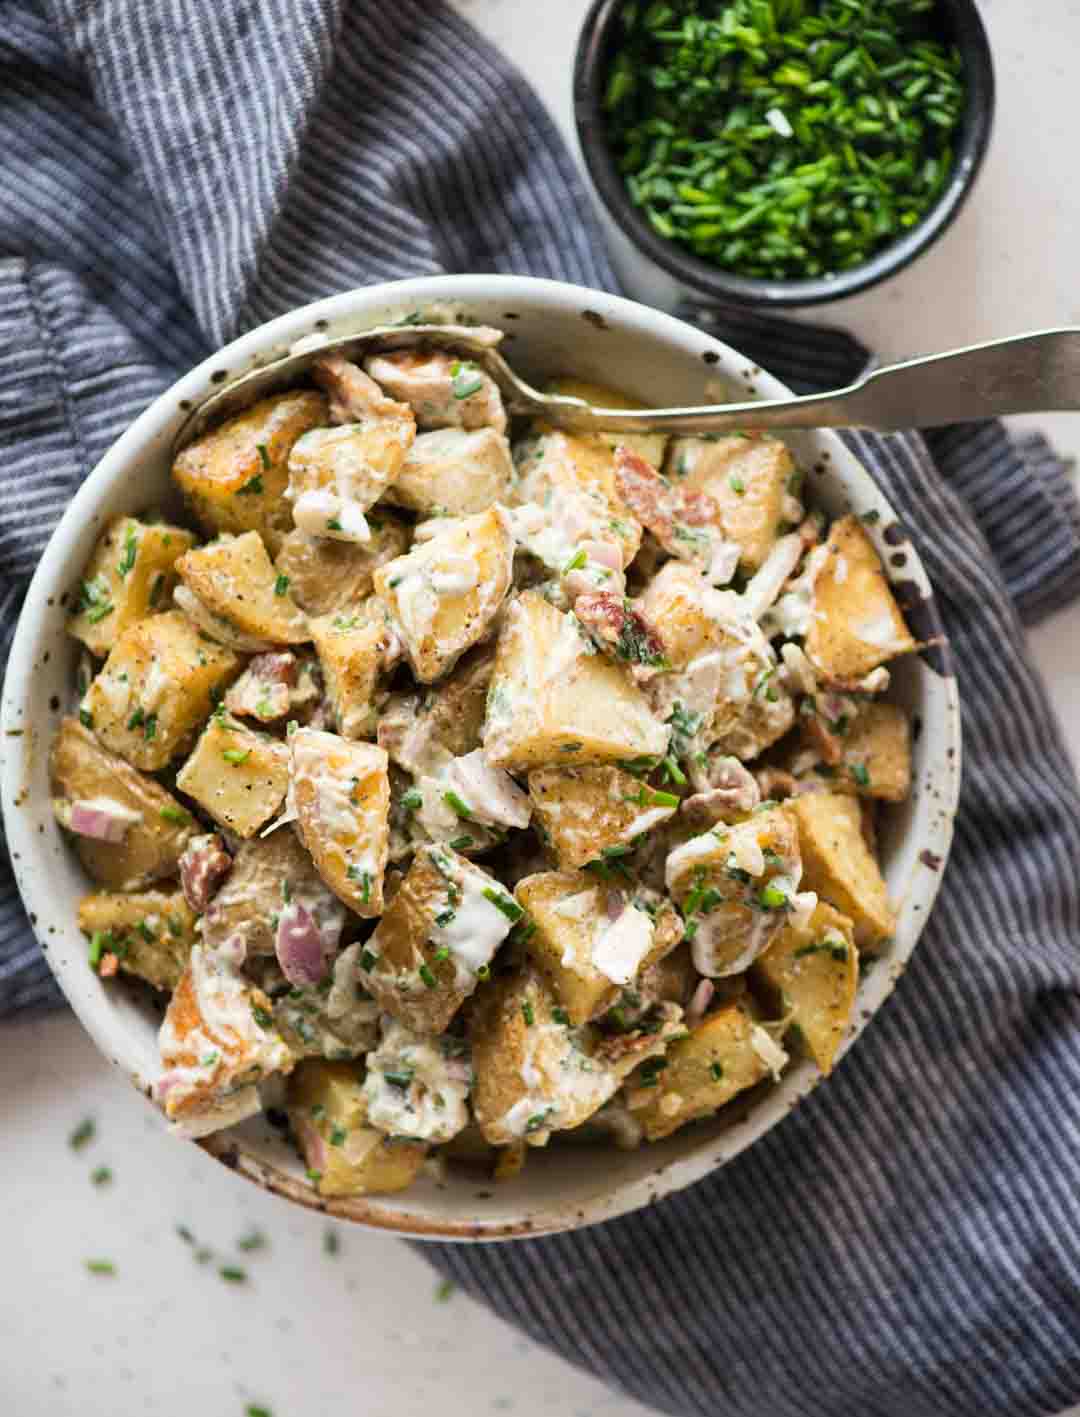 Roasted Potato Salad has Crunchy Roasted Potatoes, crispy Bacon, Onion, herb and a light creamy dressing. One of the best side dish to serve summer potluck or BBQ parties.